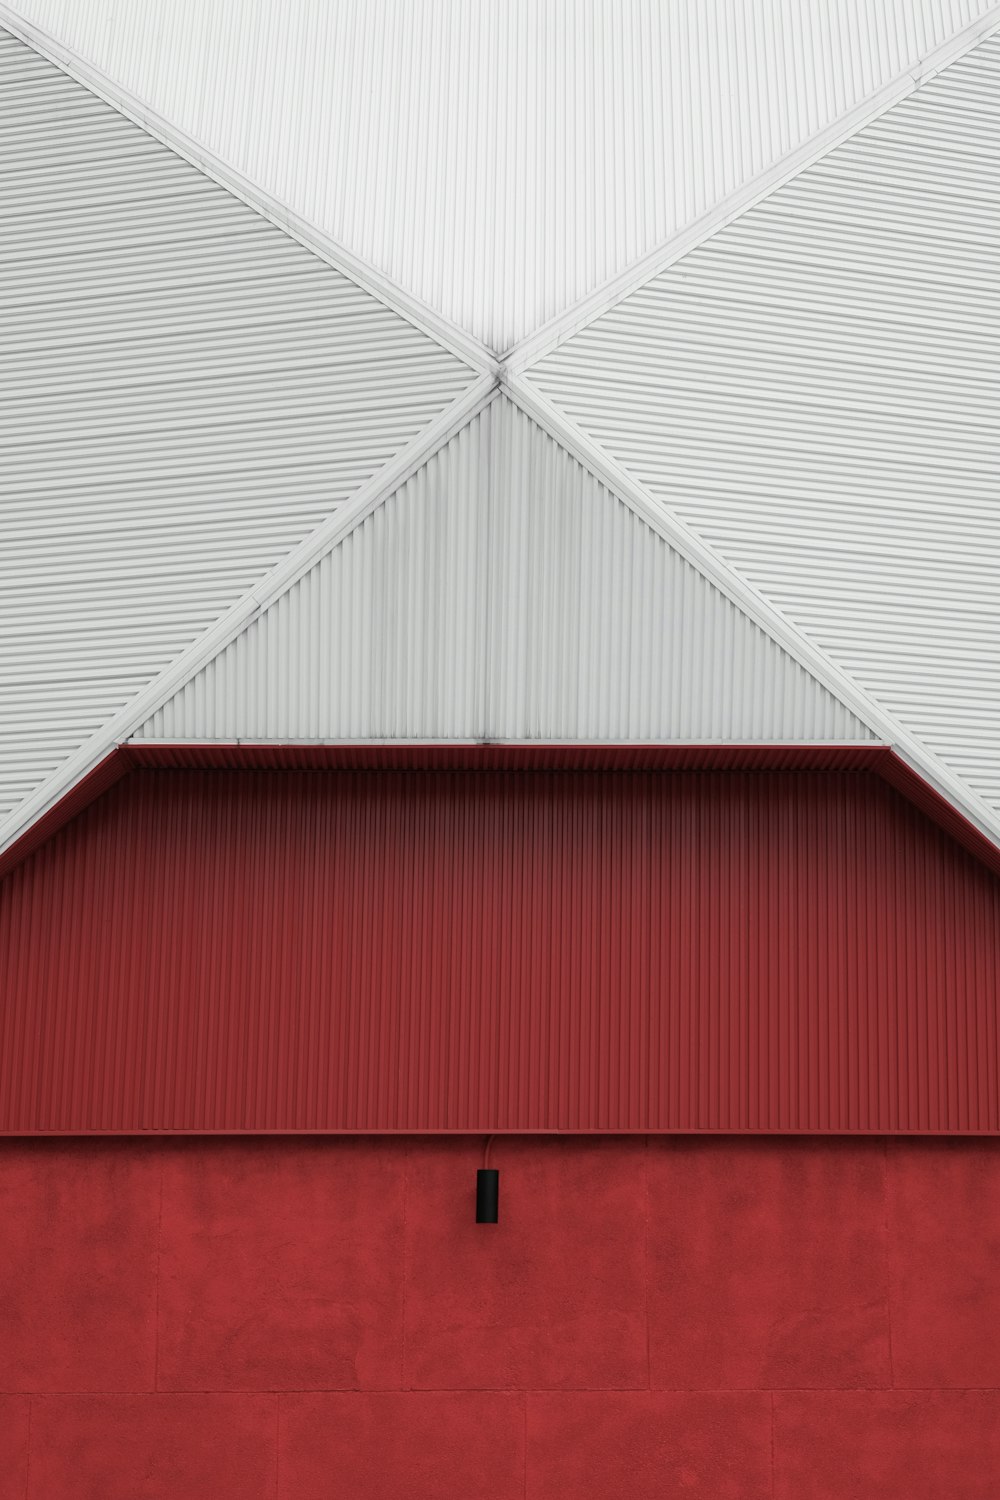 red and white wooden barn